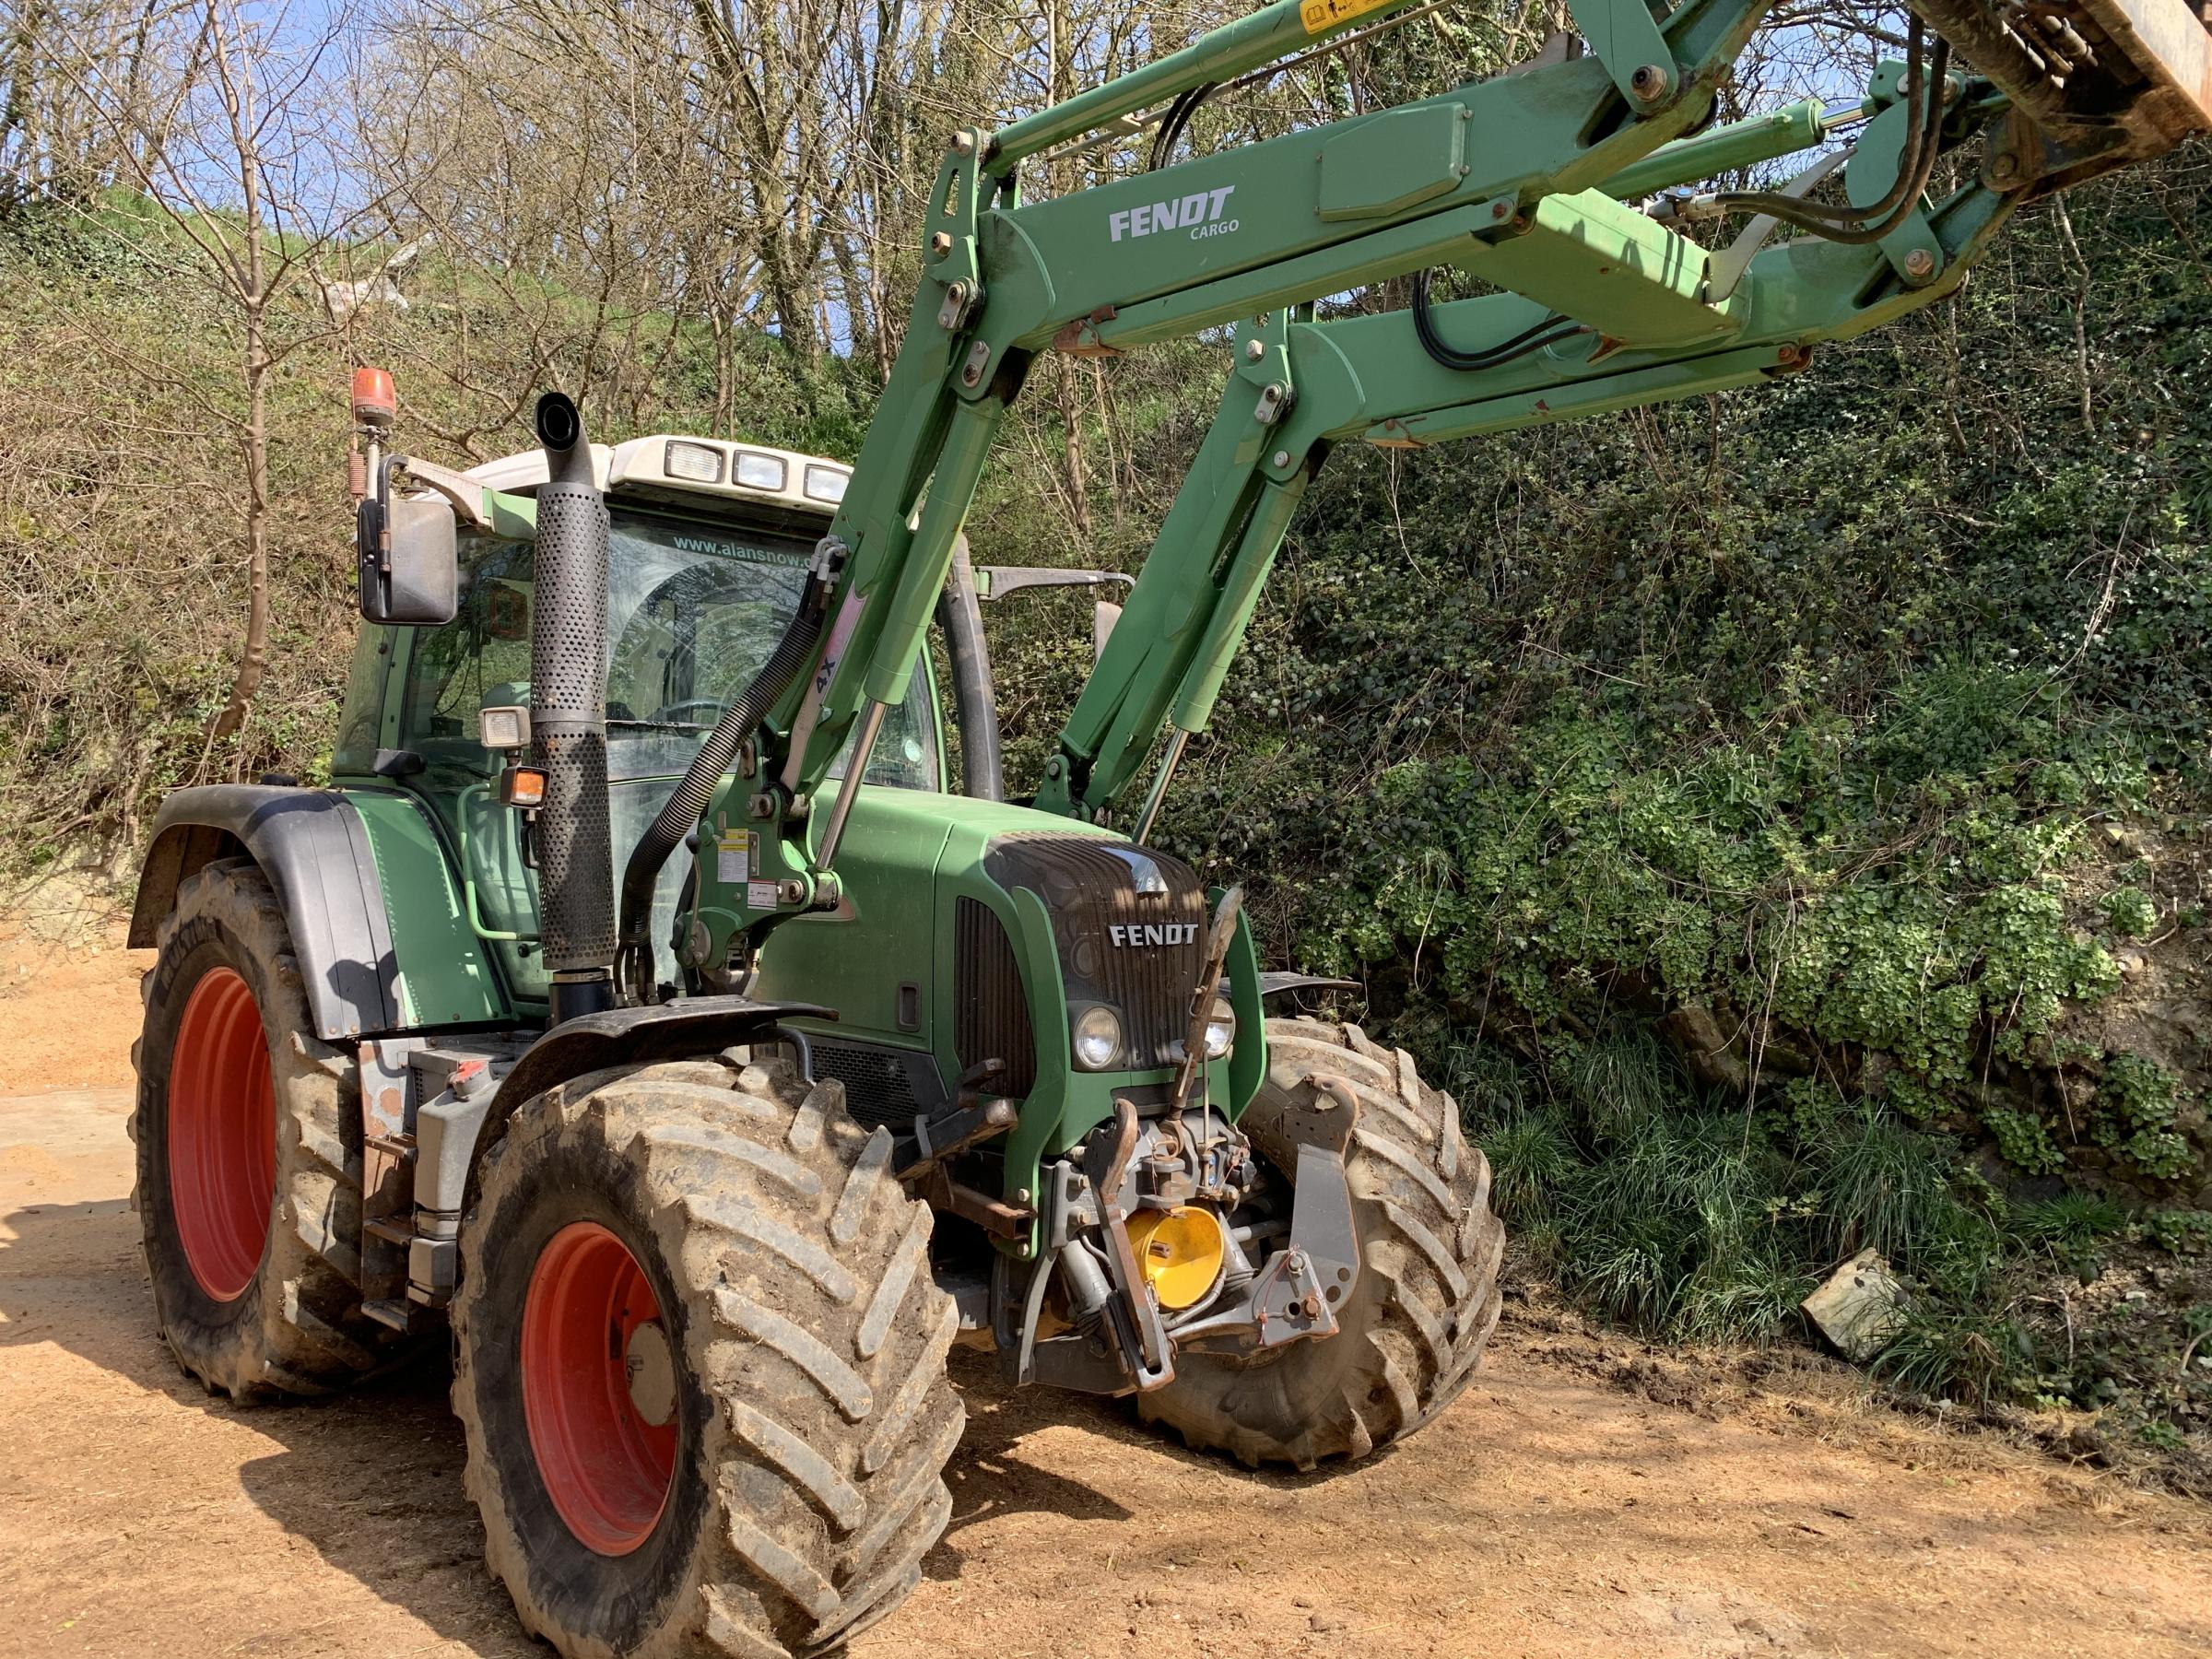 The Fendt 415 TMS